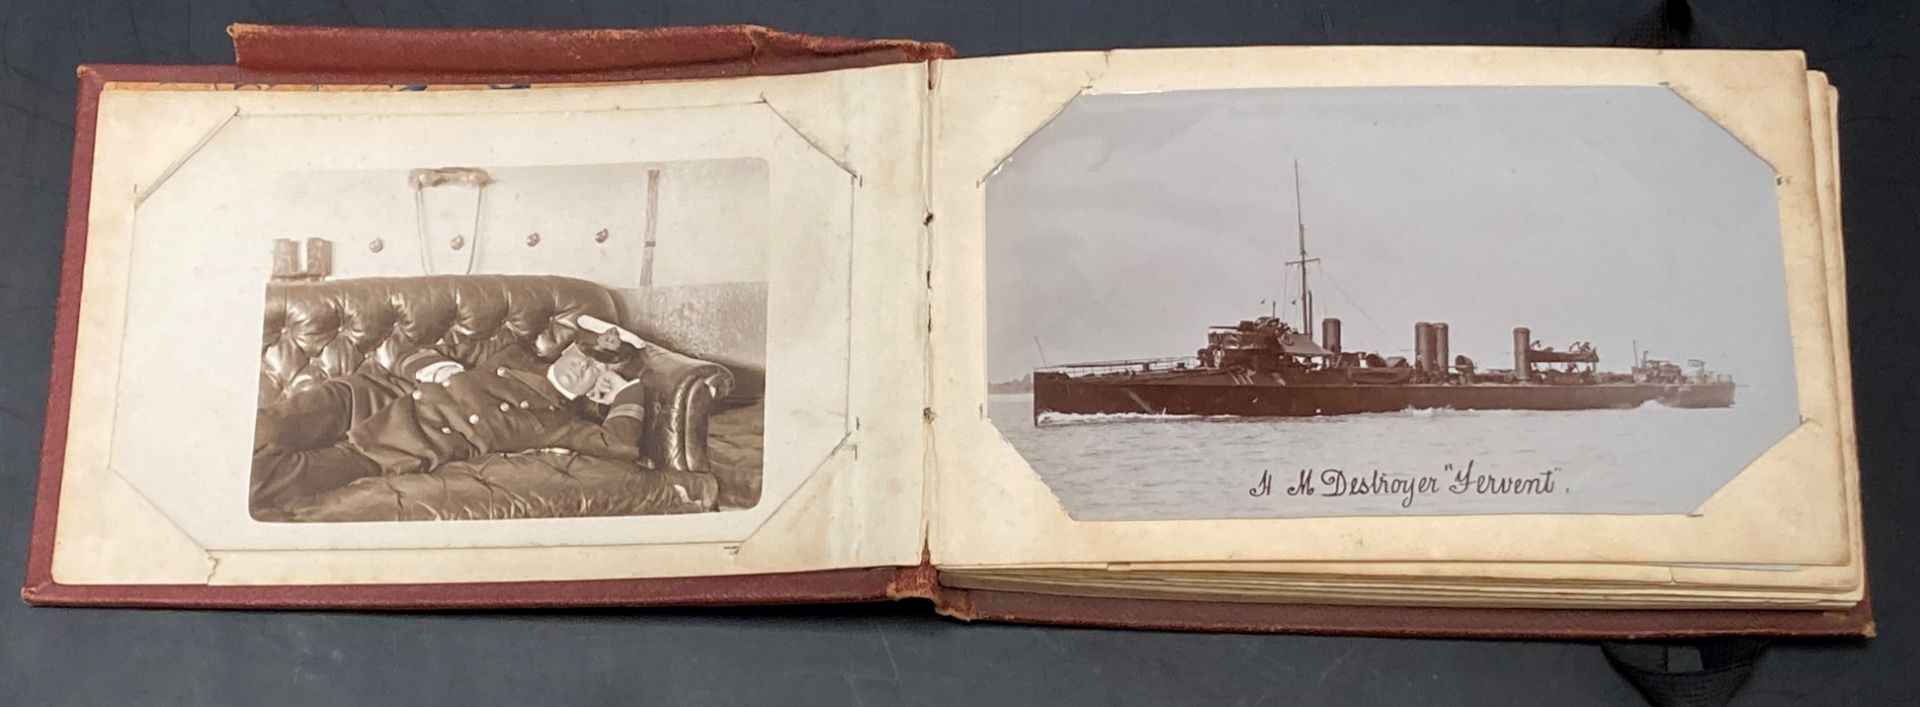 Photograph album relating to Captain Henry Maclean Fothergill who served in the Boxer Rebellion - Image 7 of 10